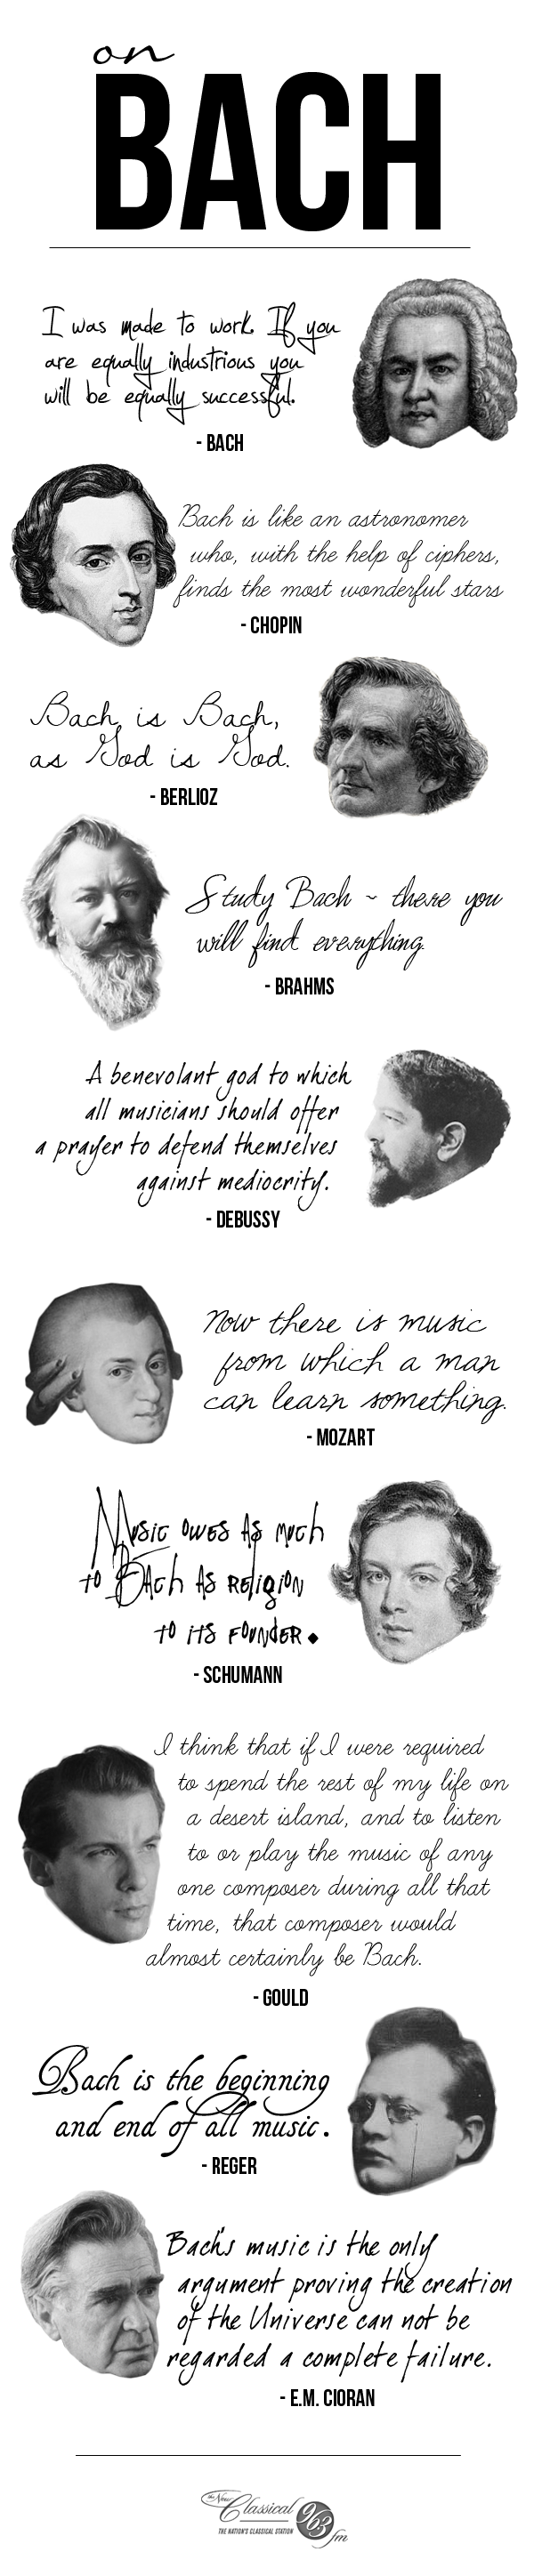 bach-quotes.png